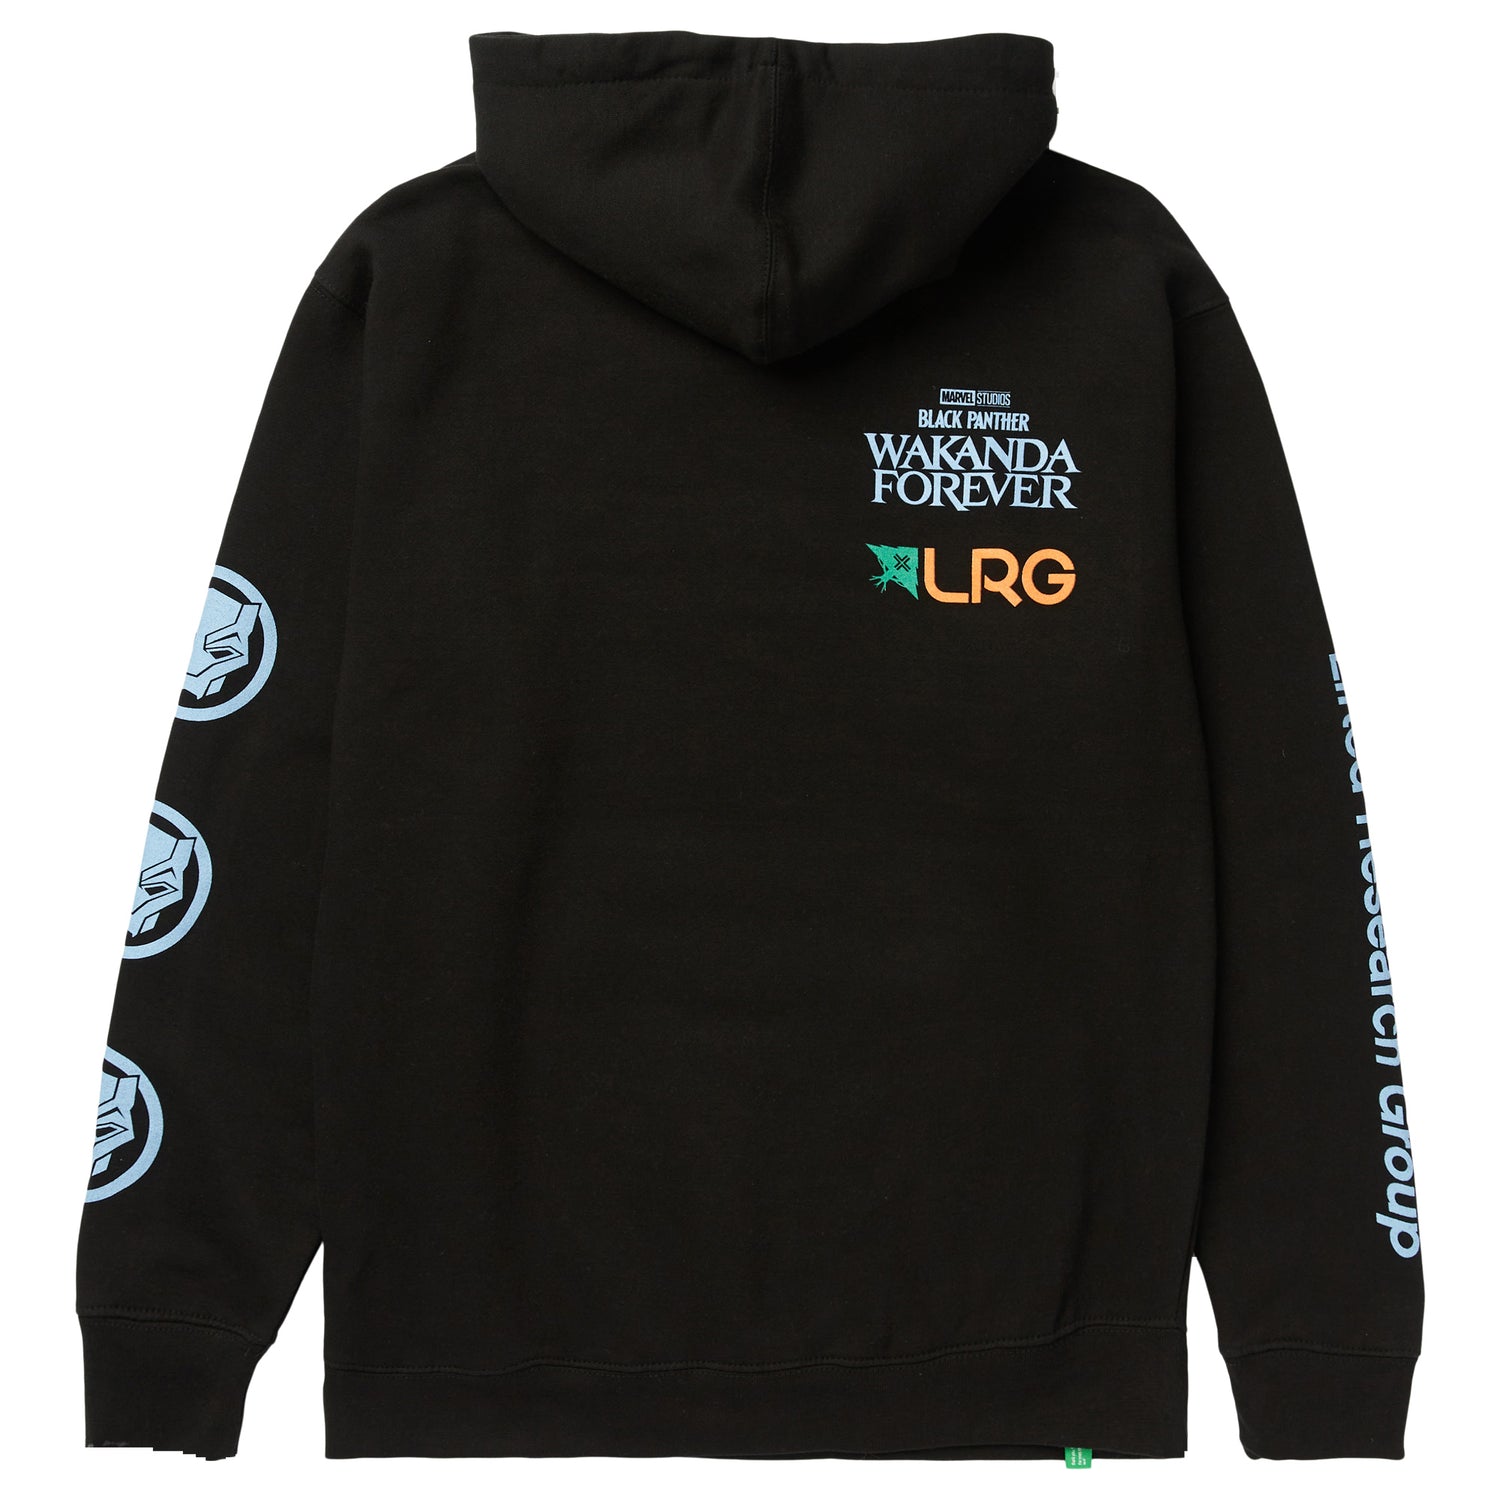 BLACK PANTHER WAKANDA FOREVER PULLOVER HOODIE - BLACK